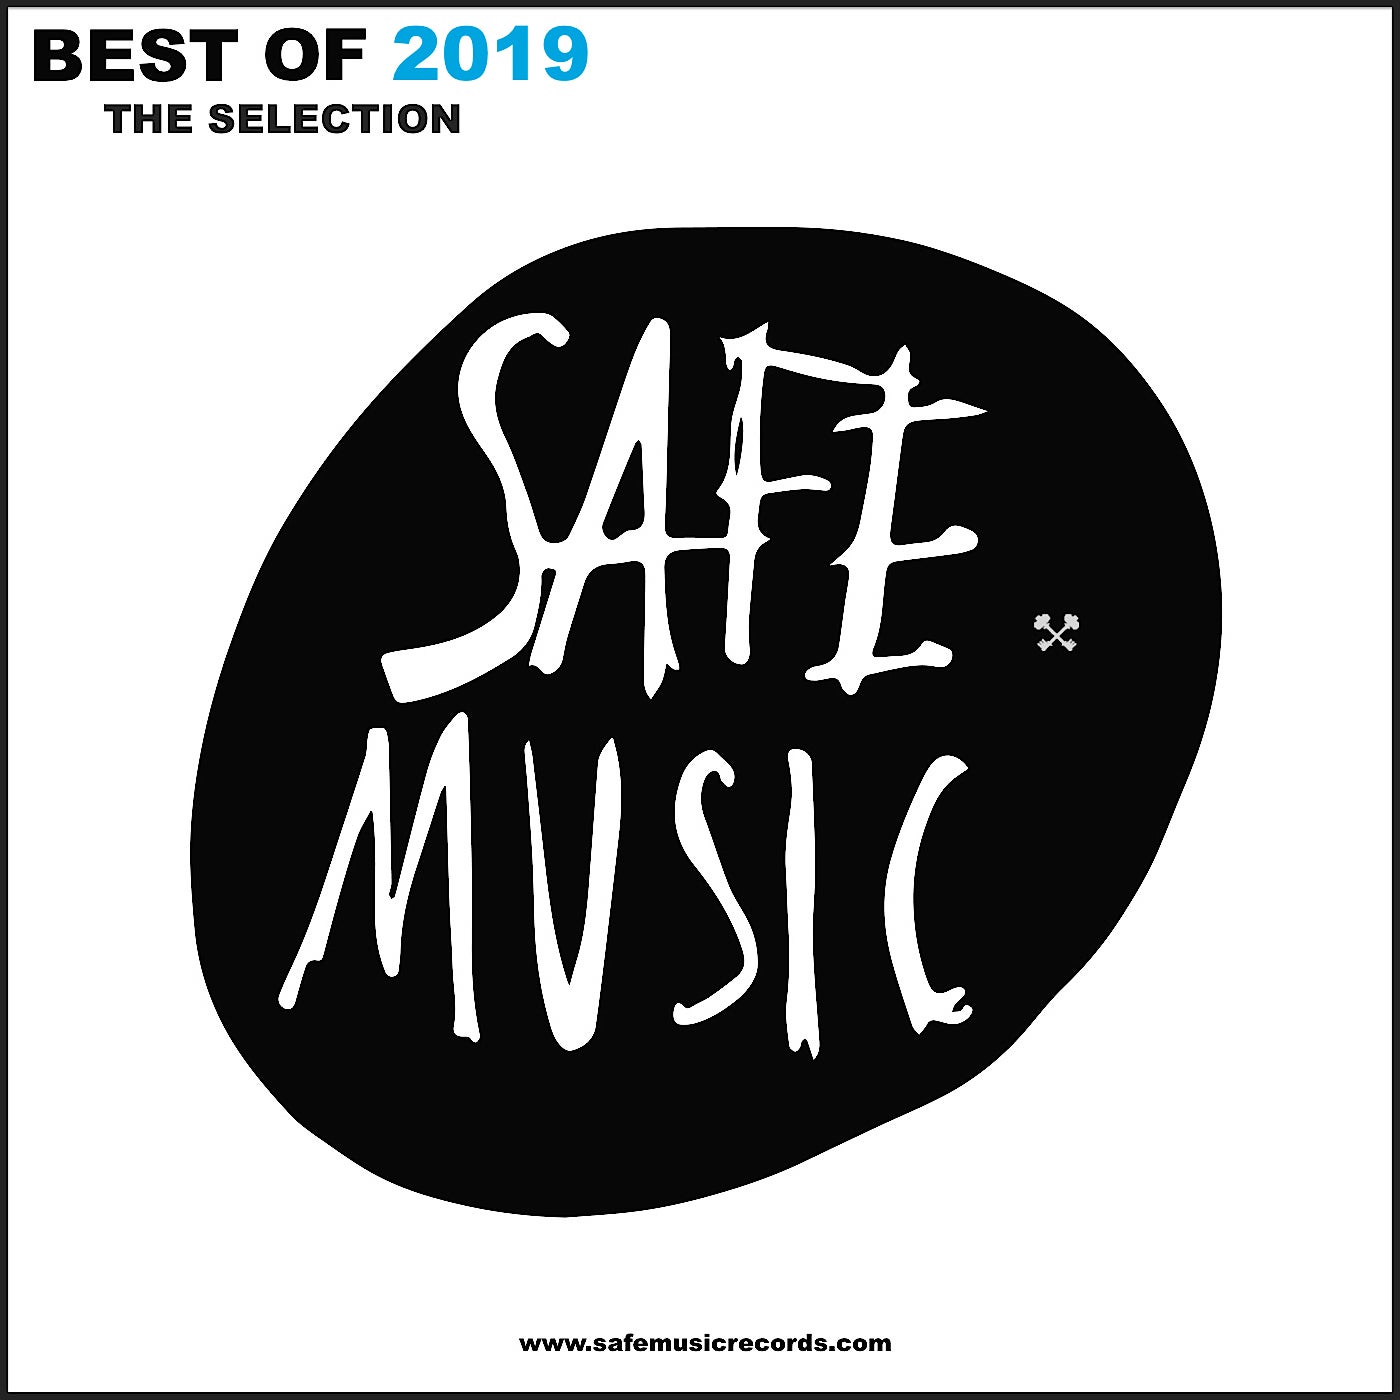 Best Of 2019: The Selection